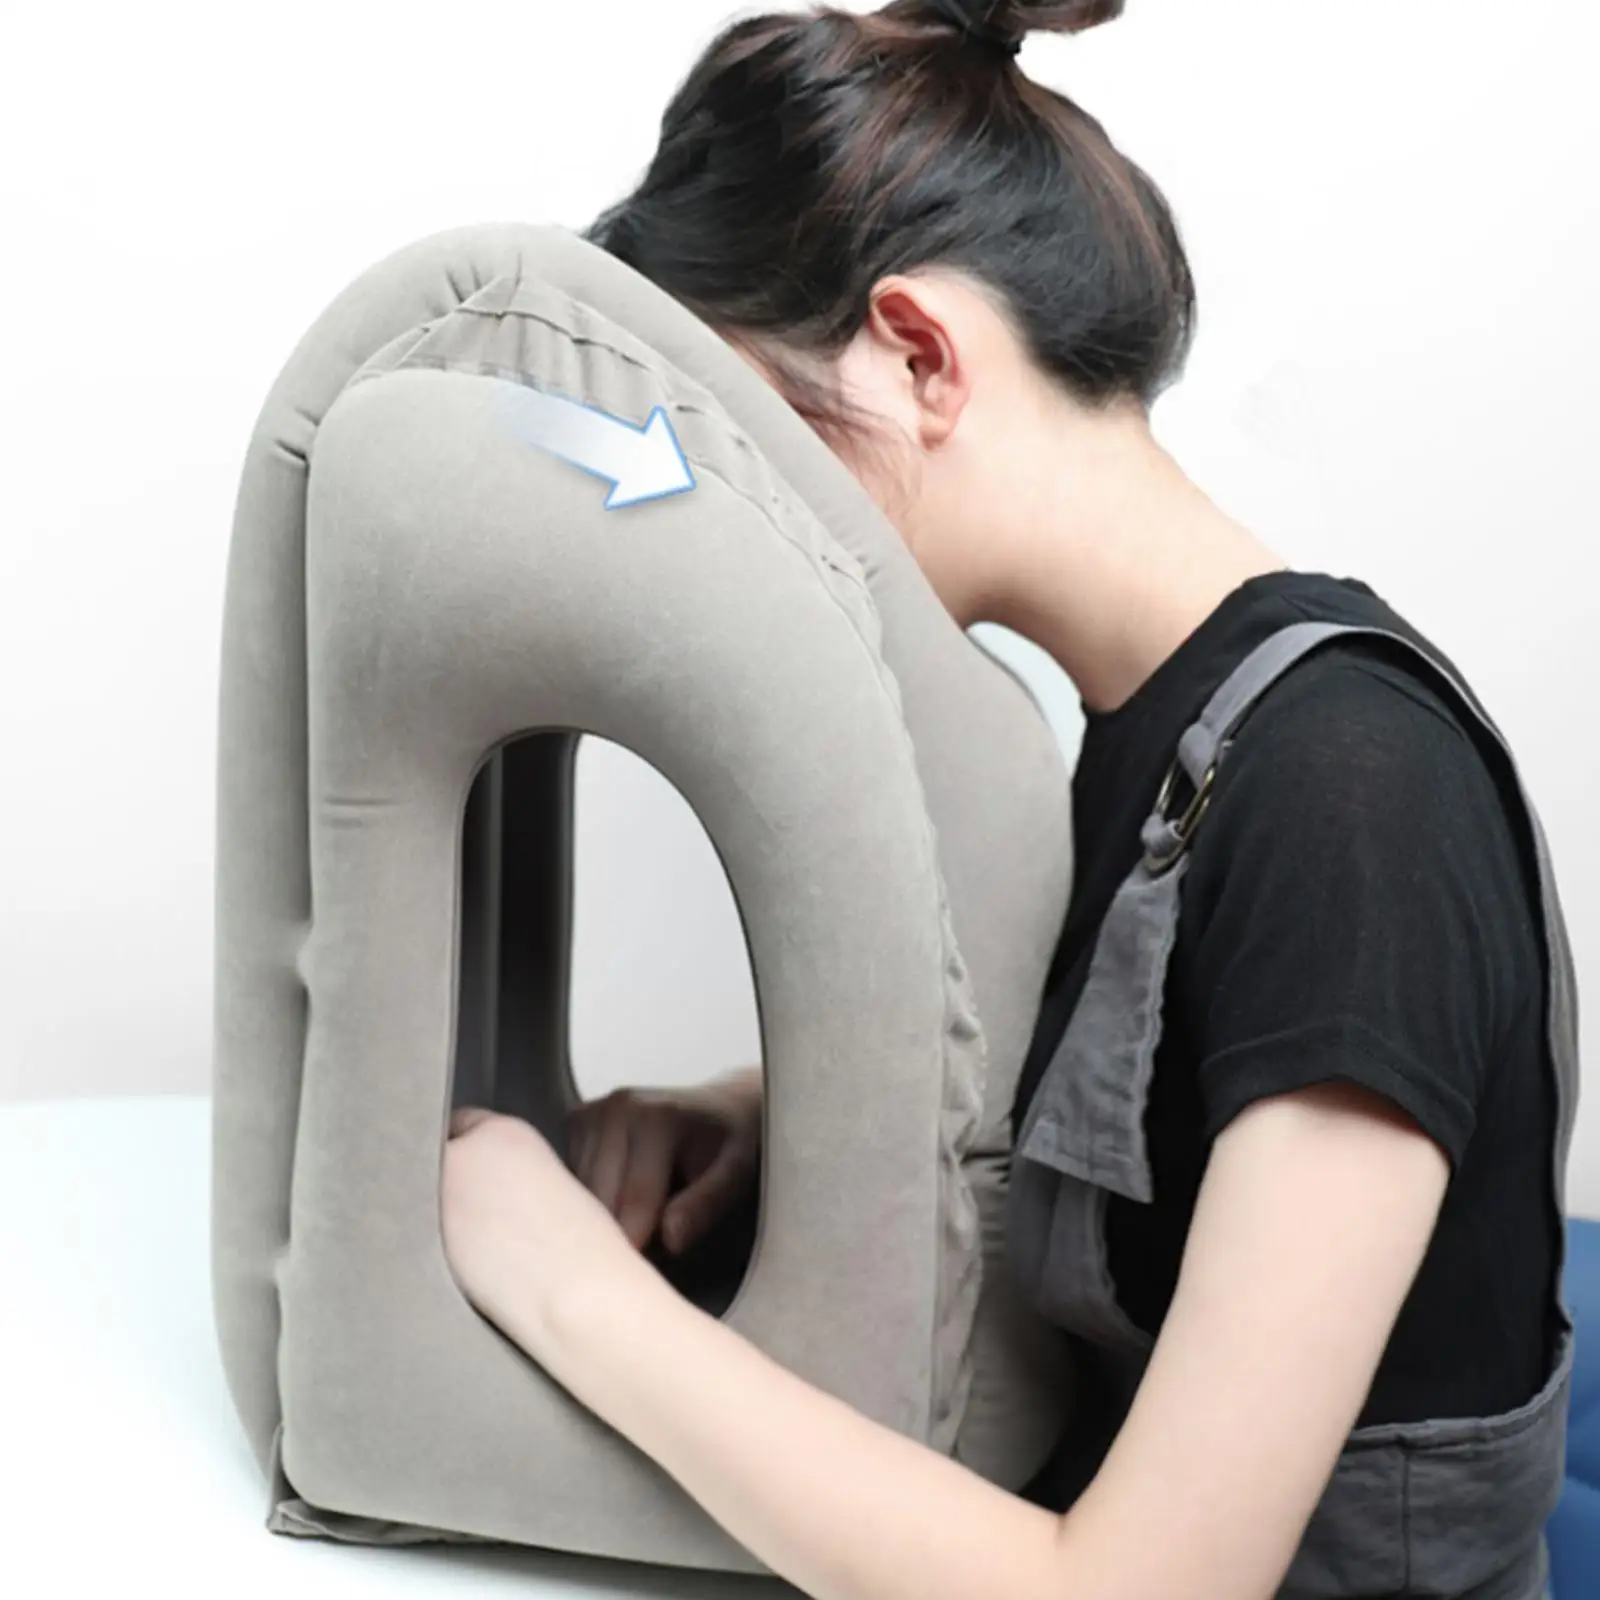 

Upgraded Inflatable Air Cushion Travel Pillow Headrest Chin Support Cushions For Airplane Plane Car Office Rest Neck Nap Pi D0b9